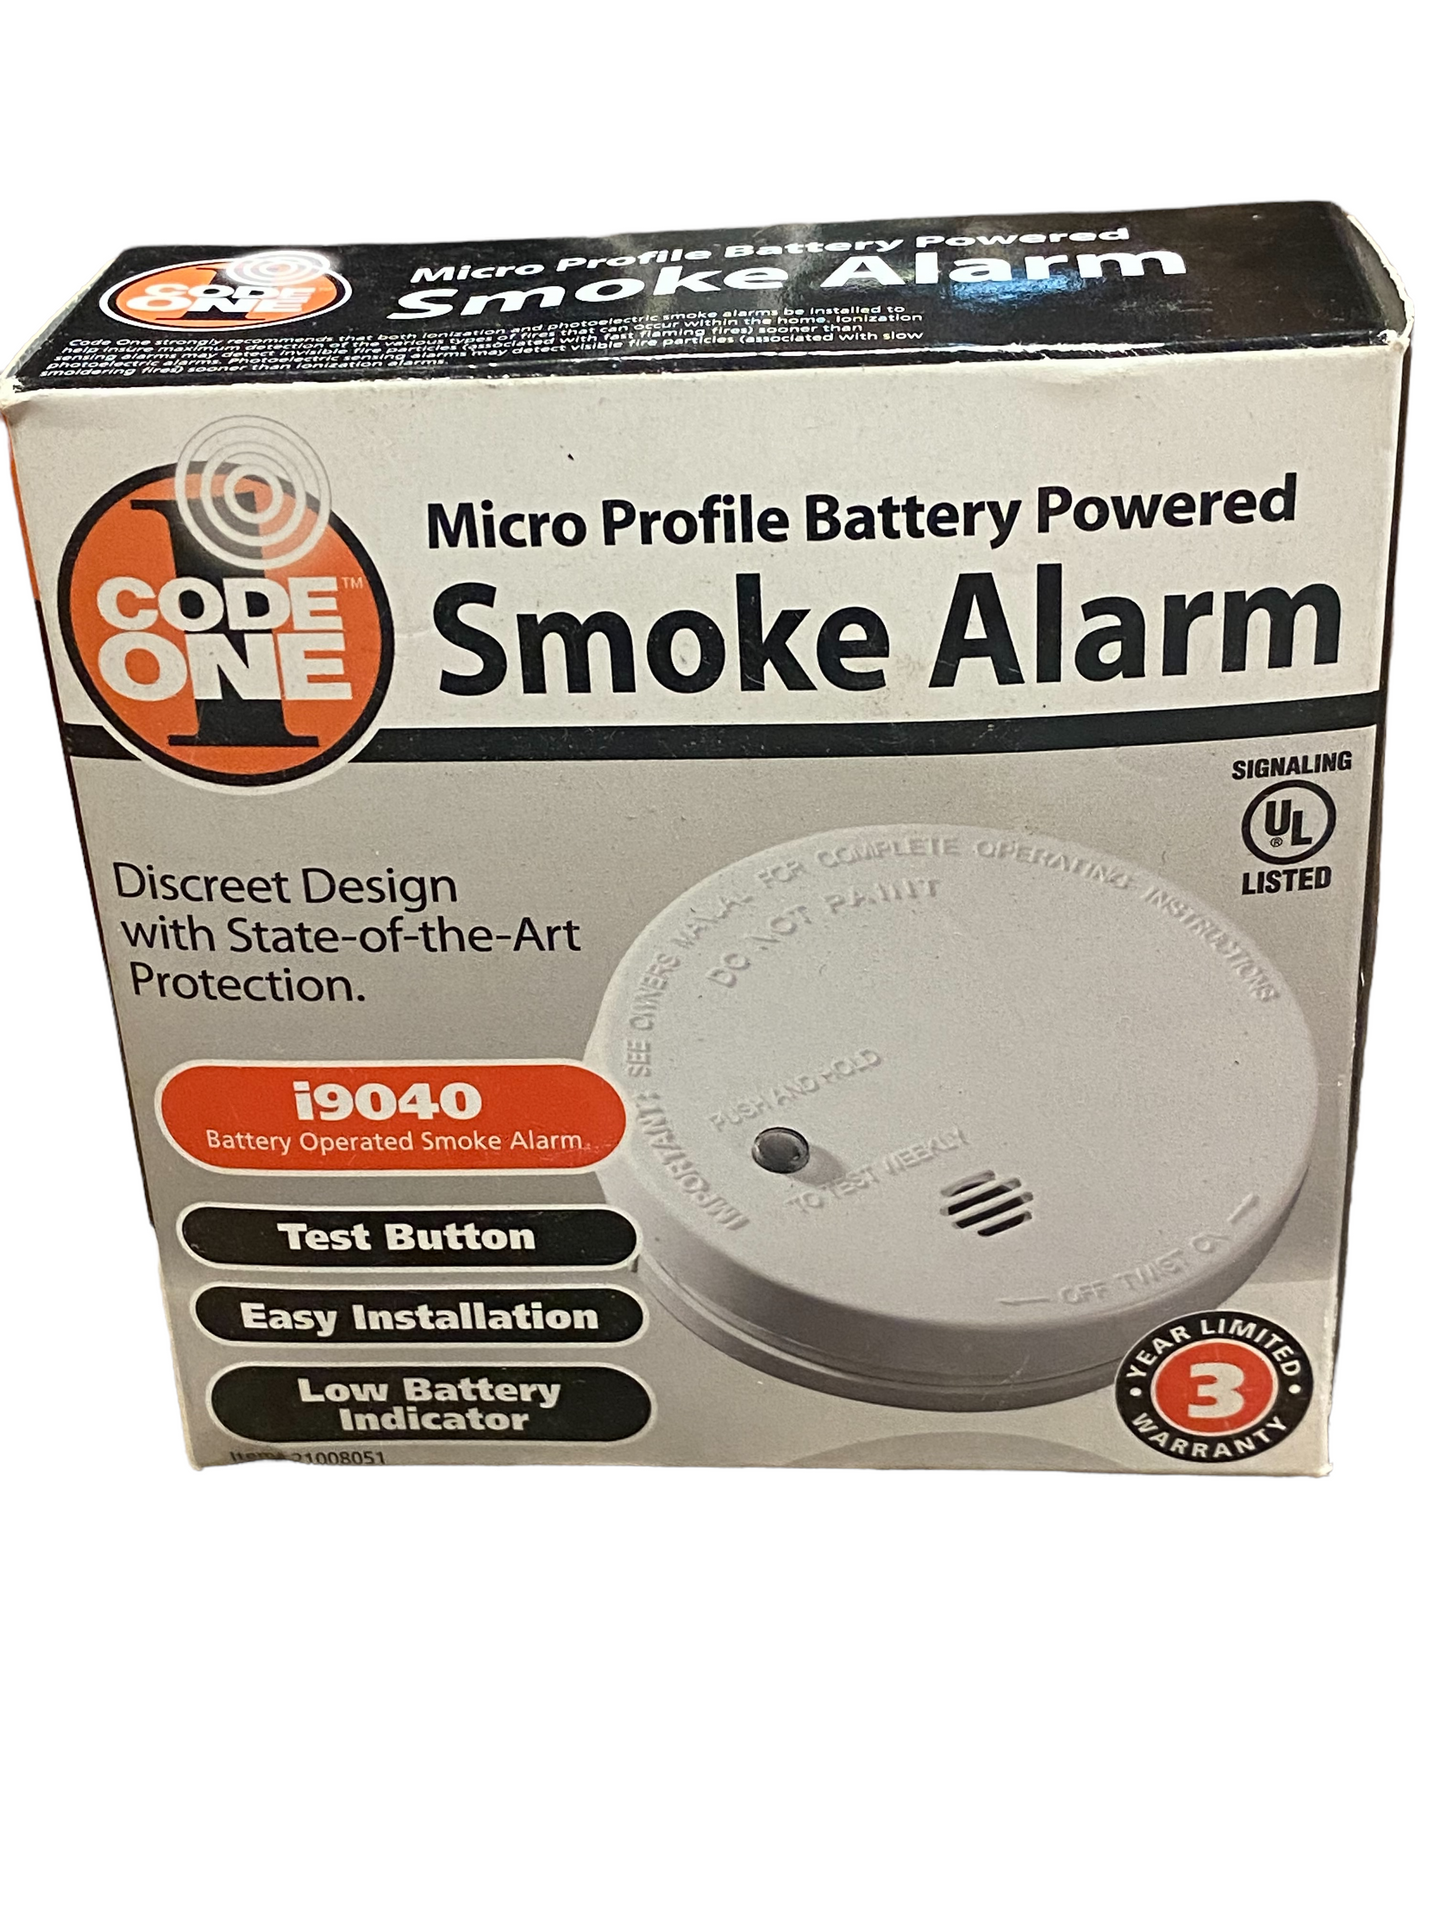 Code One Micro Profile 9V Battery Operated Smoke Fire Alarm i9040 85db Alarm Brand New in the box. 9V Battery Operated